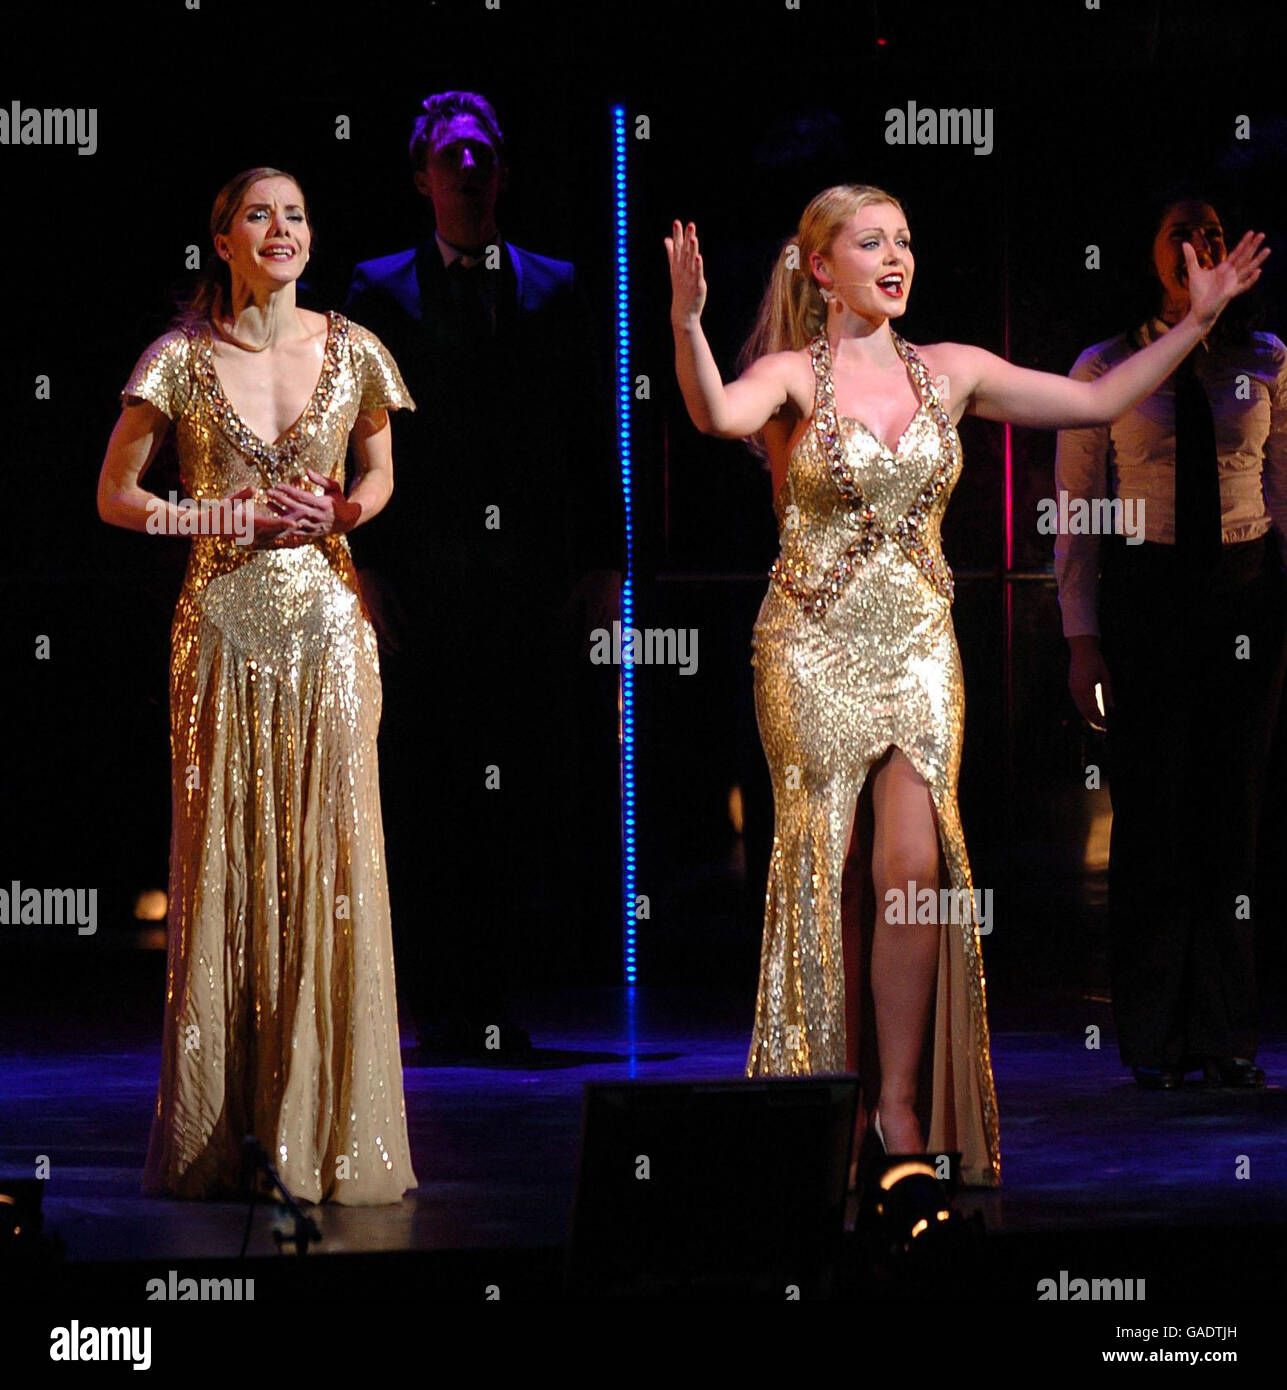 Darcey Bussell and Katherine Jenkins perform during the press night for Viva La Diva at the Lyric Theatre, The Lowry, Salford Quays in Manchester. Stock Photo